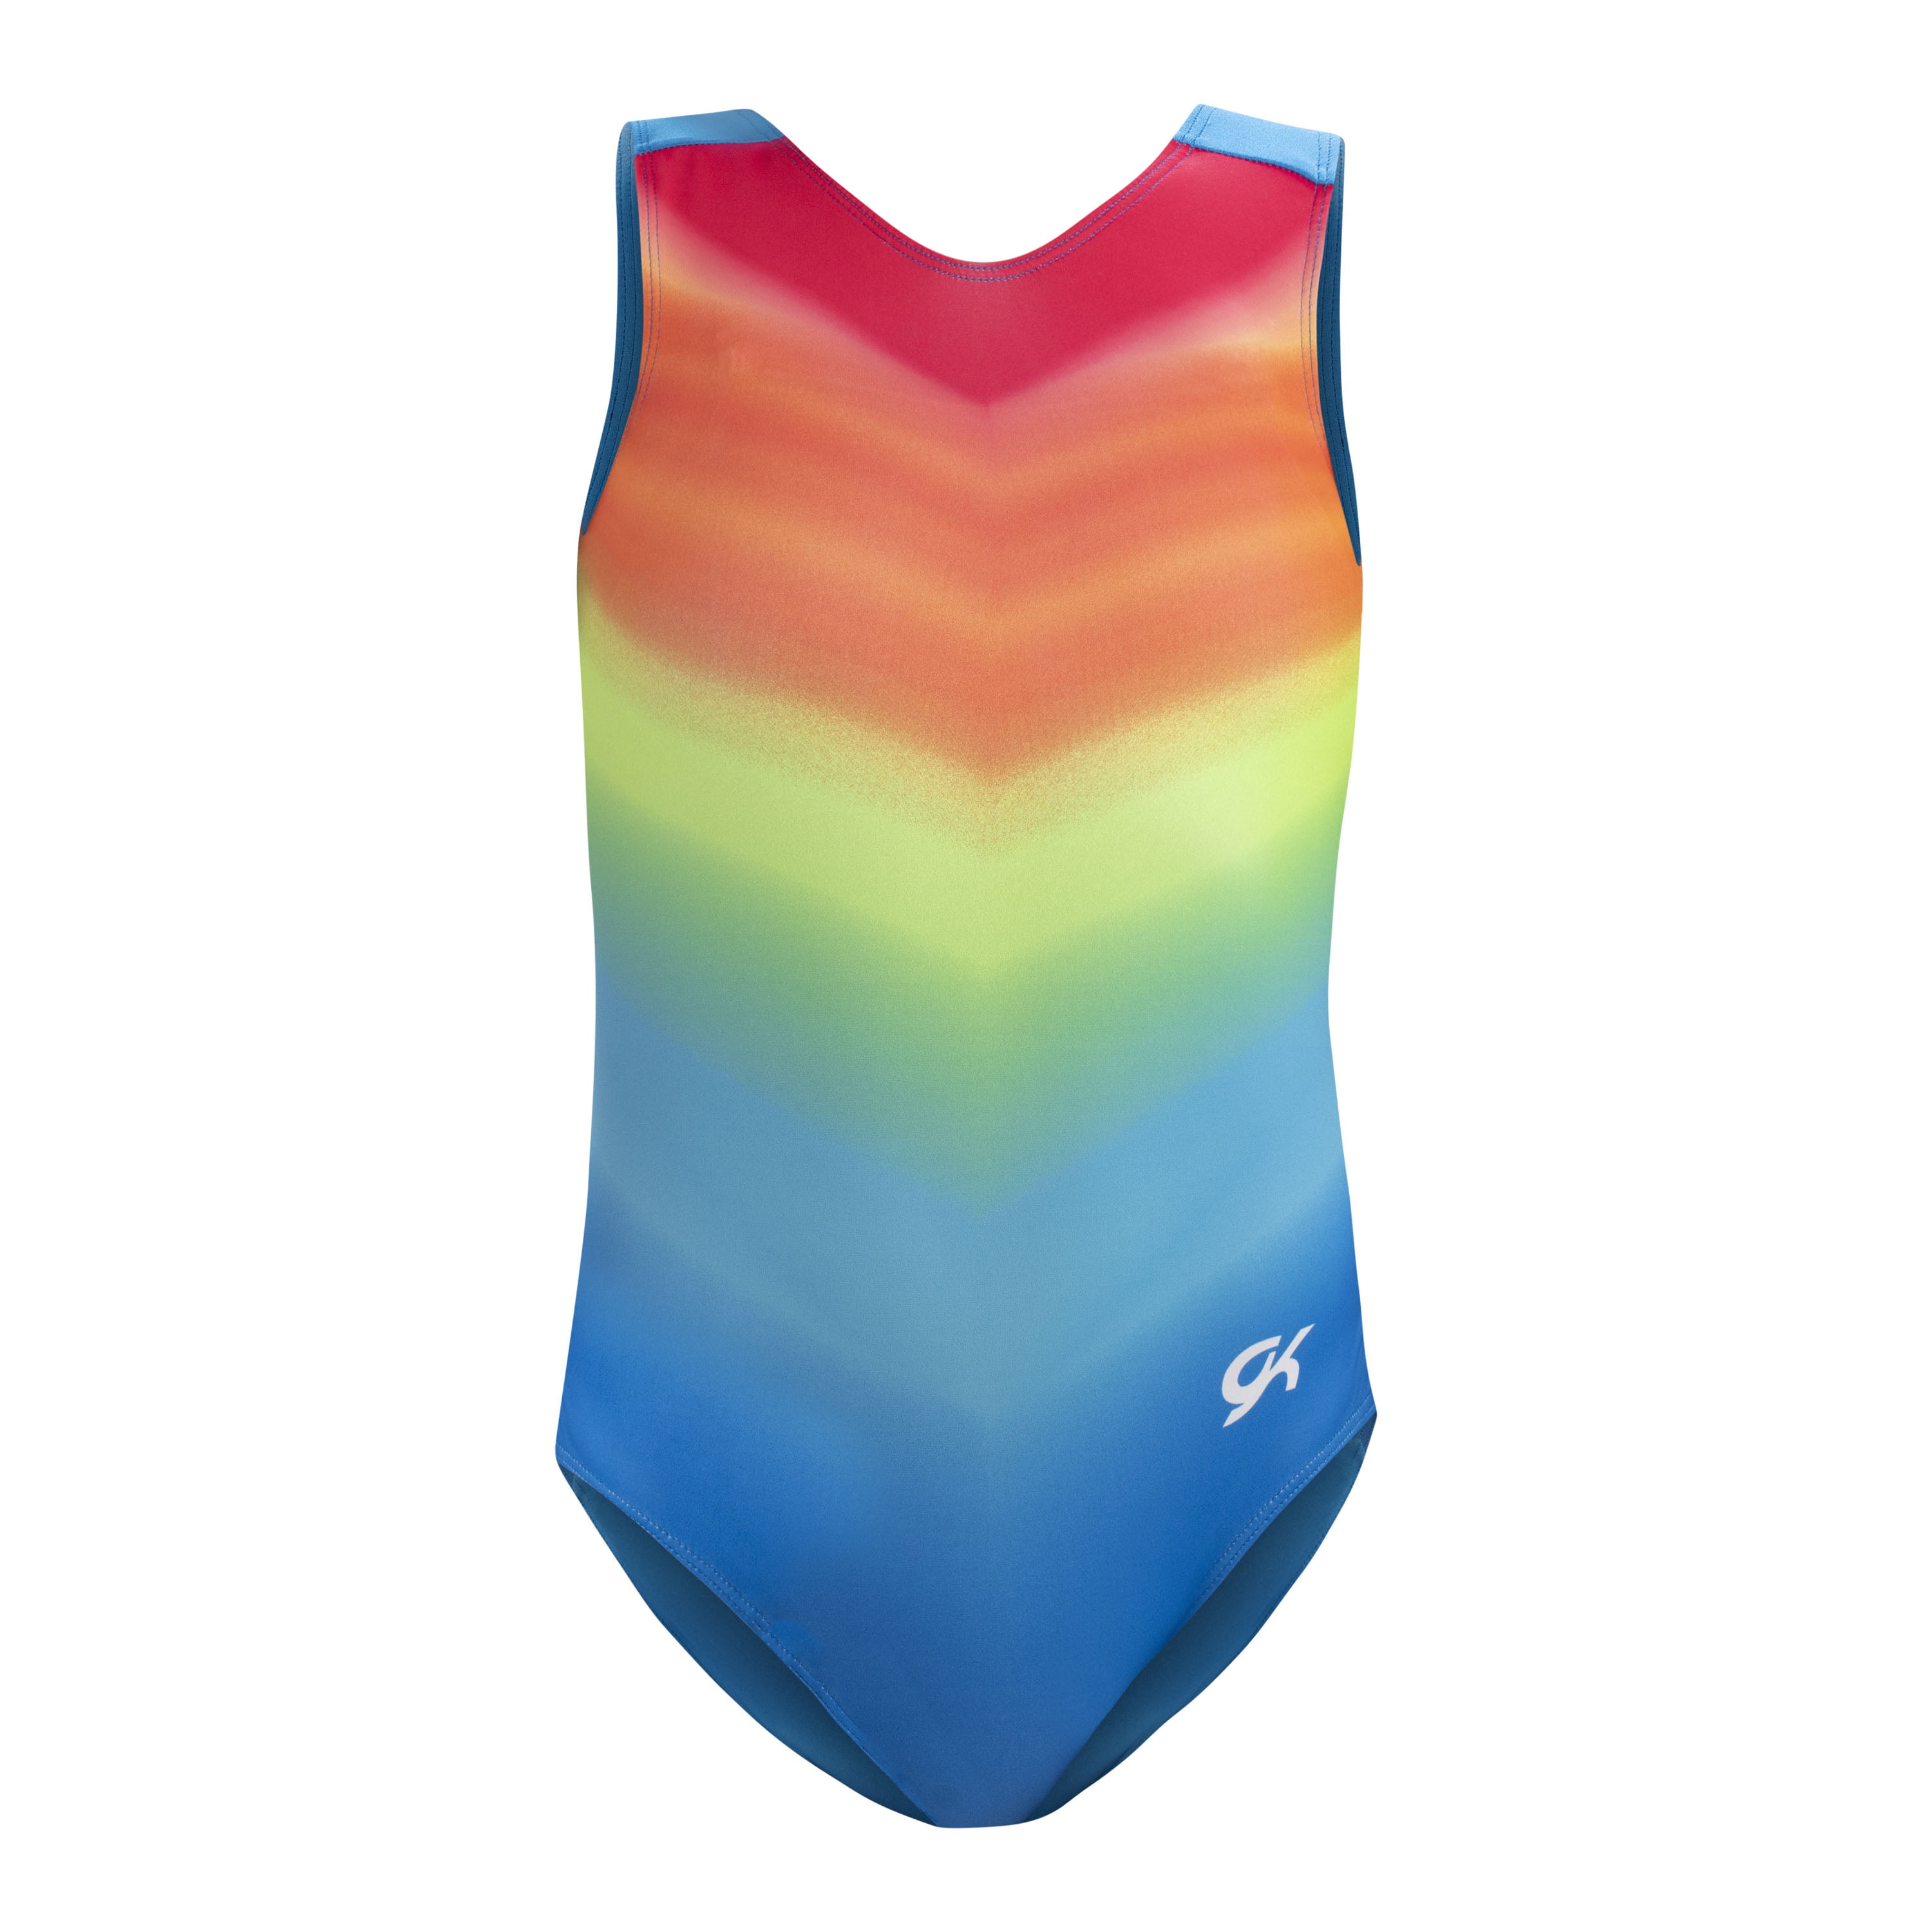 Details about   GK Elite Evening Trapeze Gymnastics LEOTARD Child & Adult Sizes New with Tags 